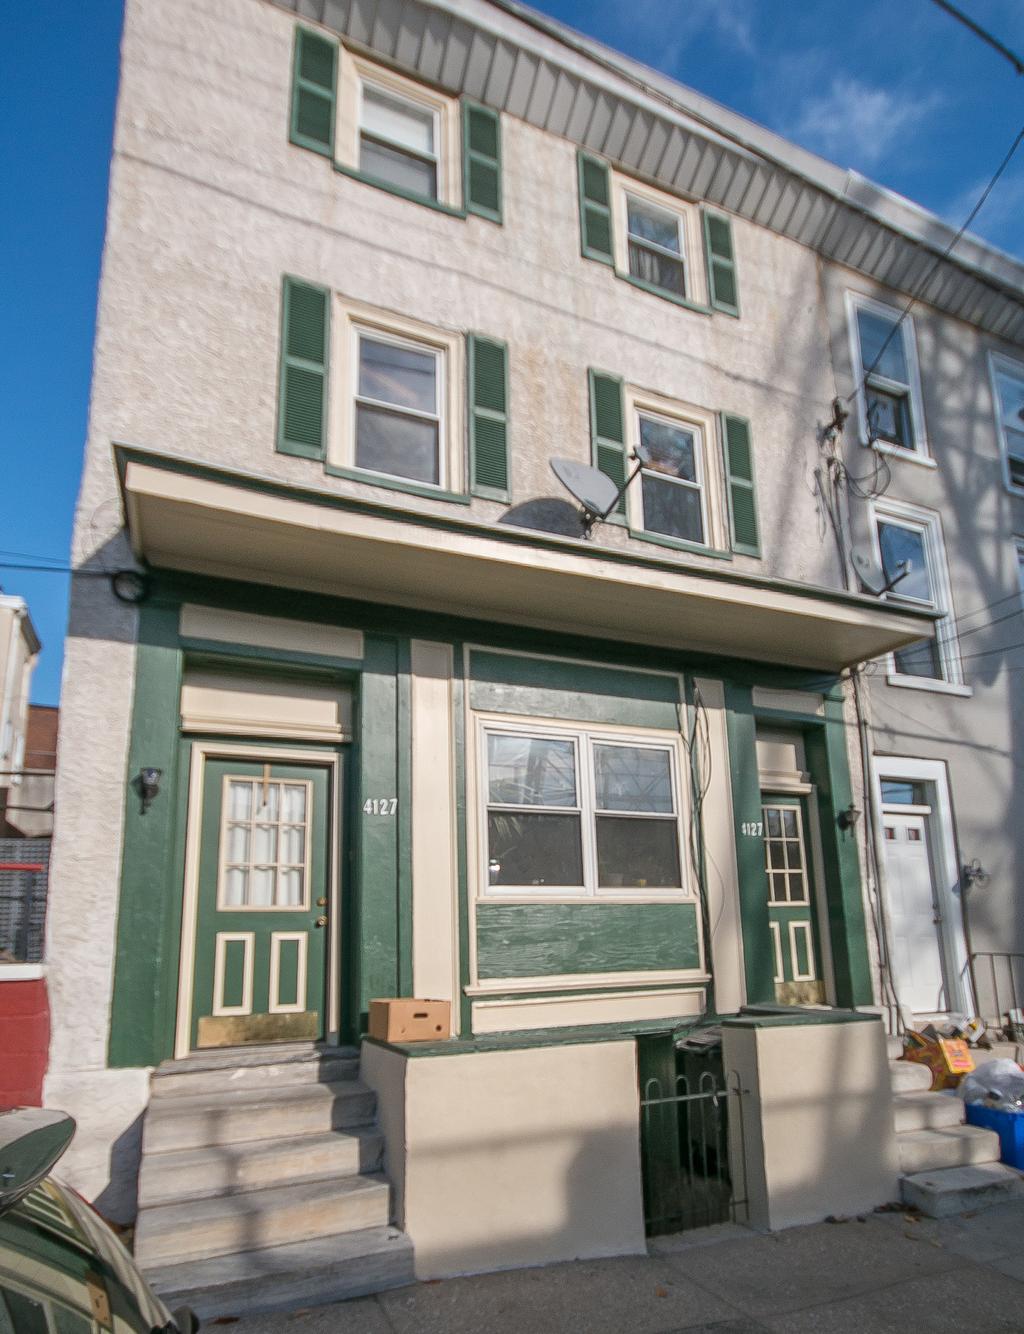 MULTI-FAMILY MANAYUNK PROPERTY FOR SALE 4127 CRESSON ST.